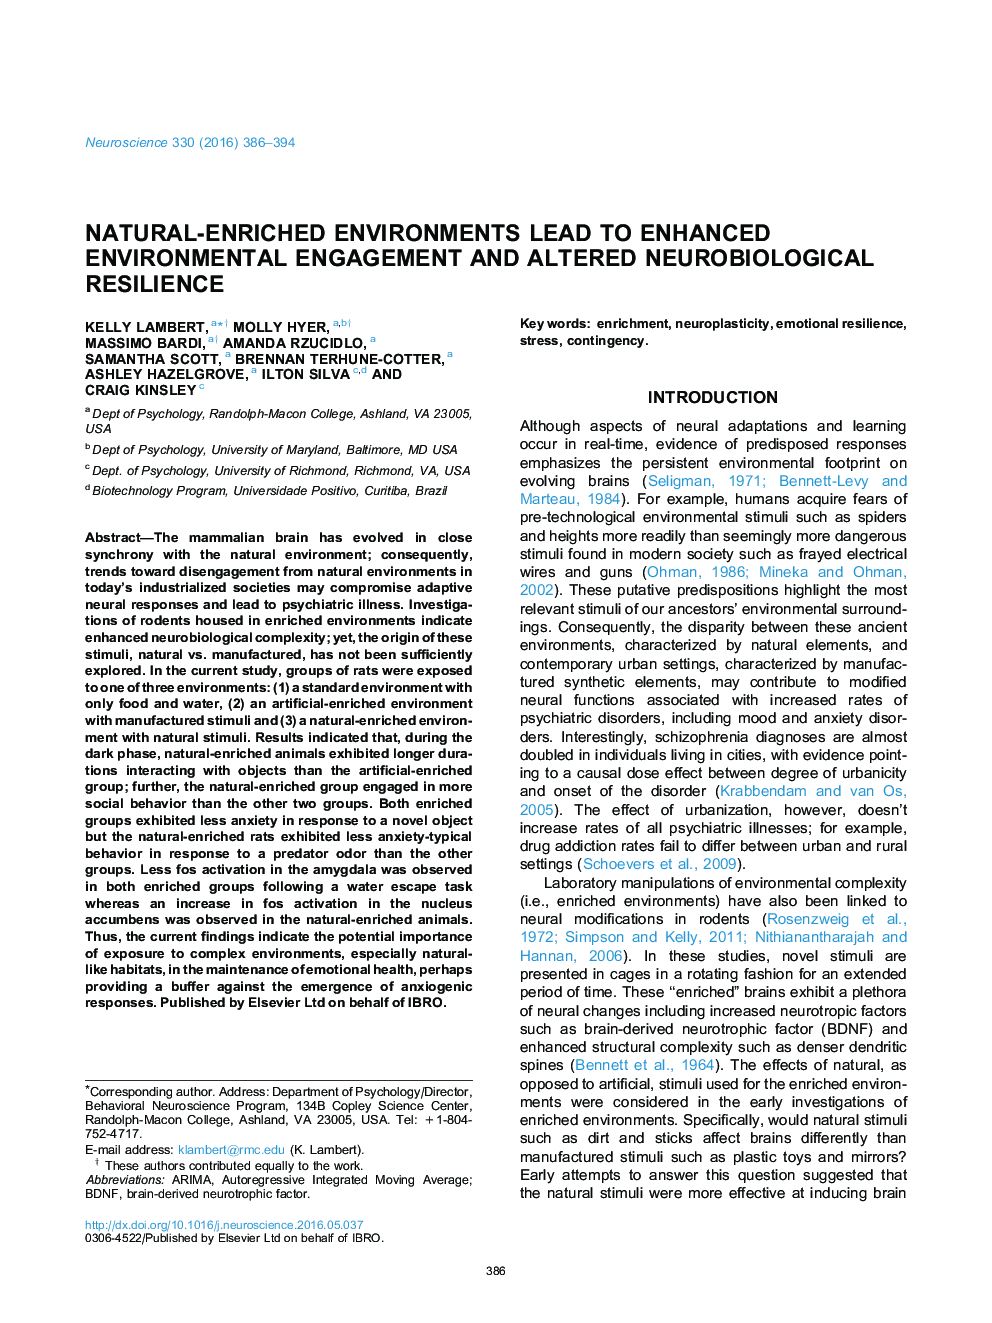 Natural-enriched environments lead to enhanced environmental engagement and altered neurobiological resilience